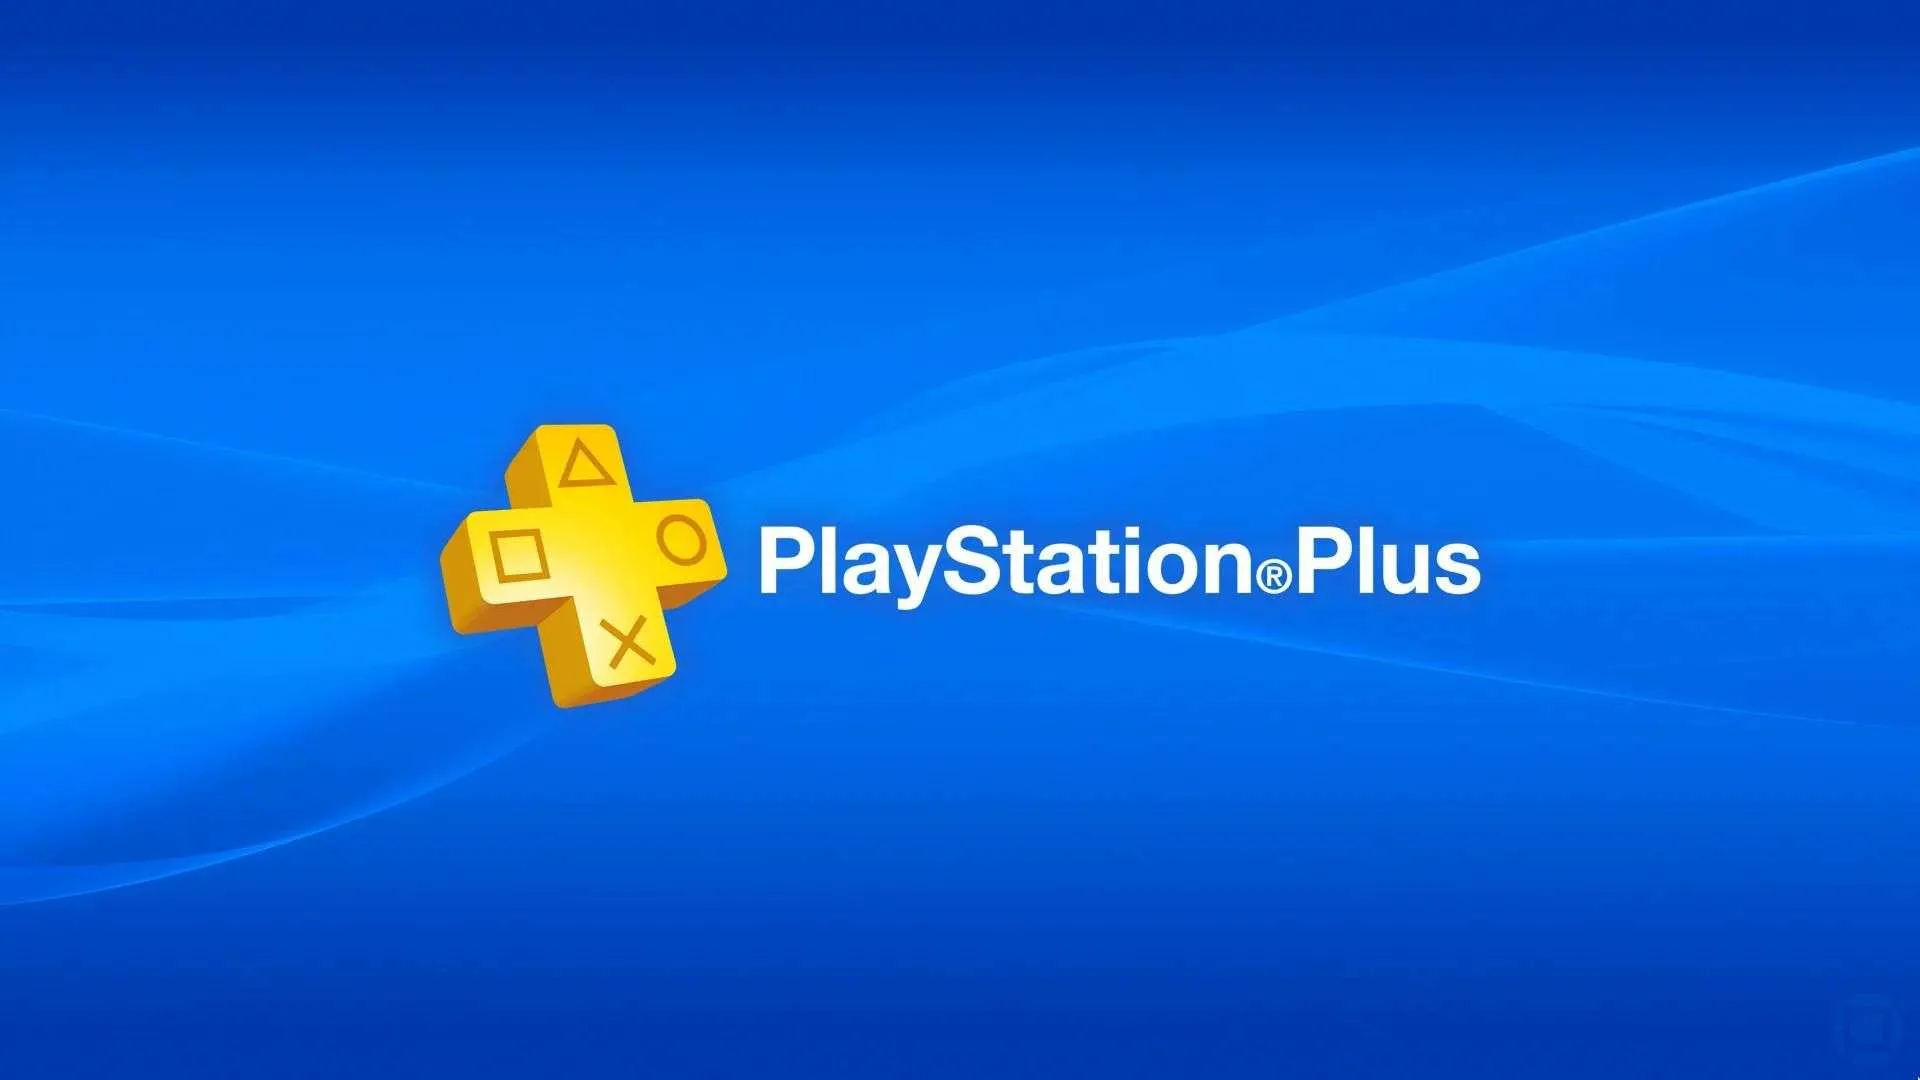 What is PlayStation Plus?